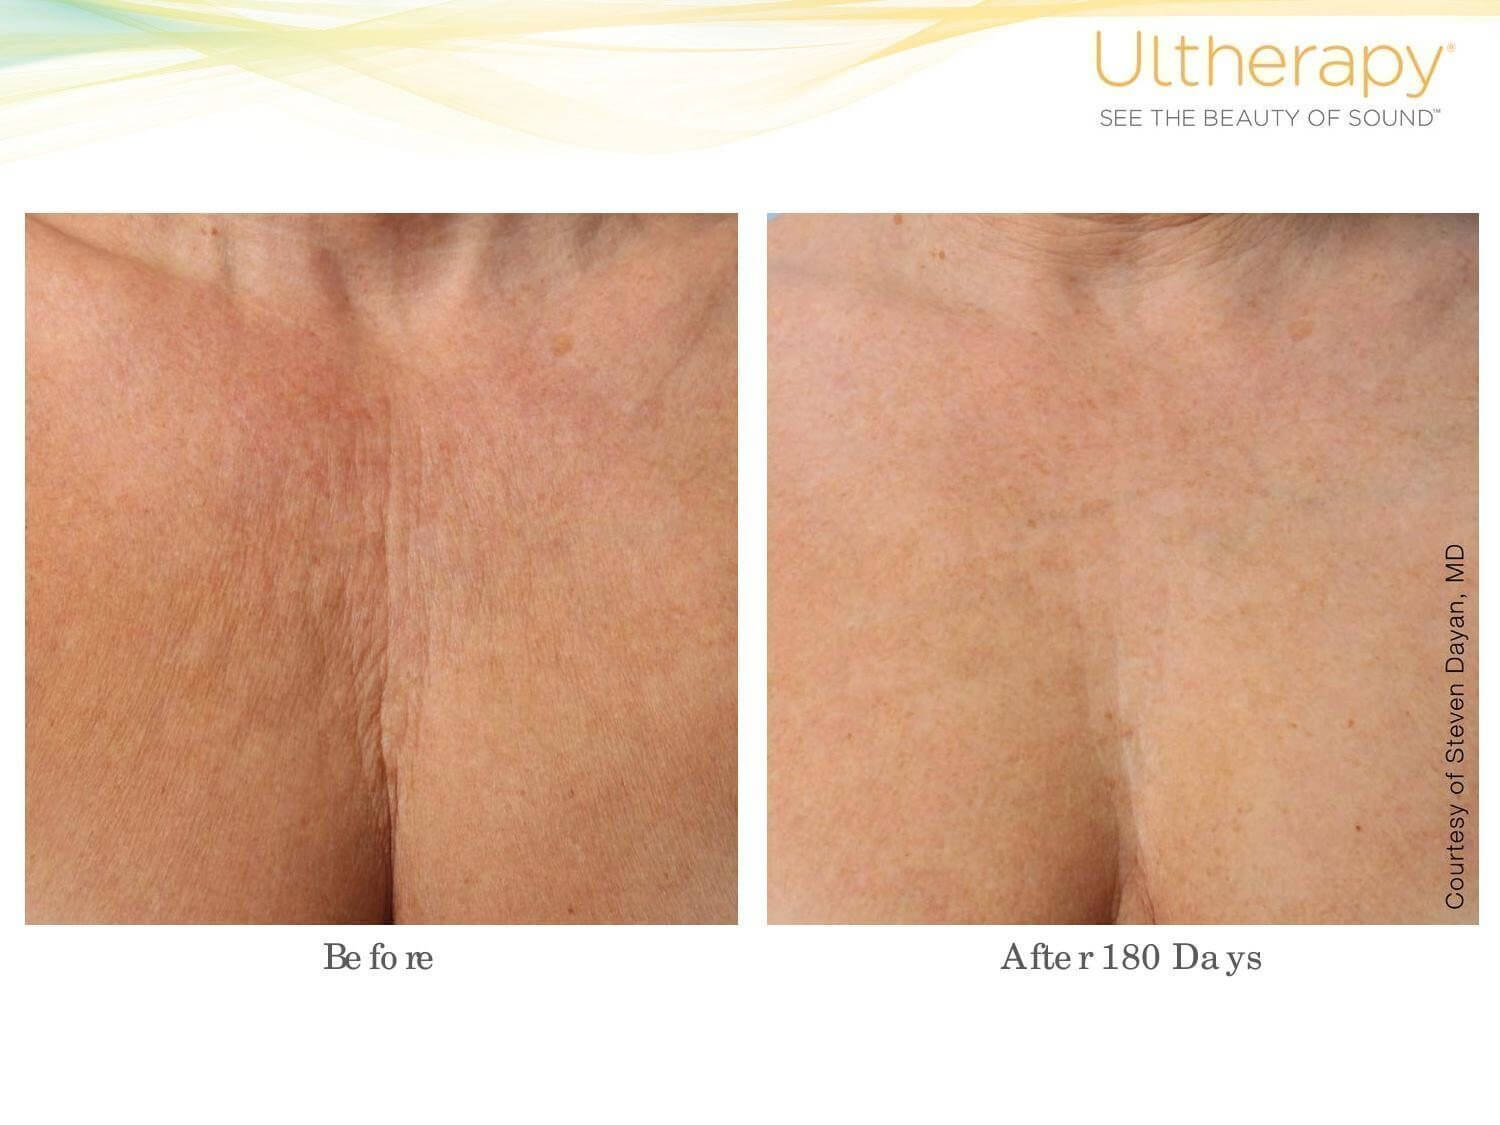 Ultherapy